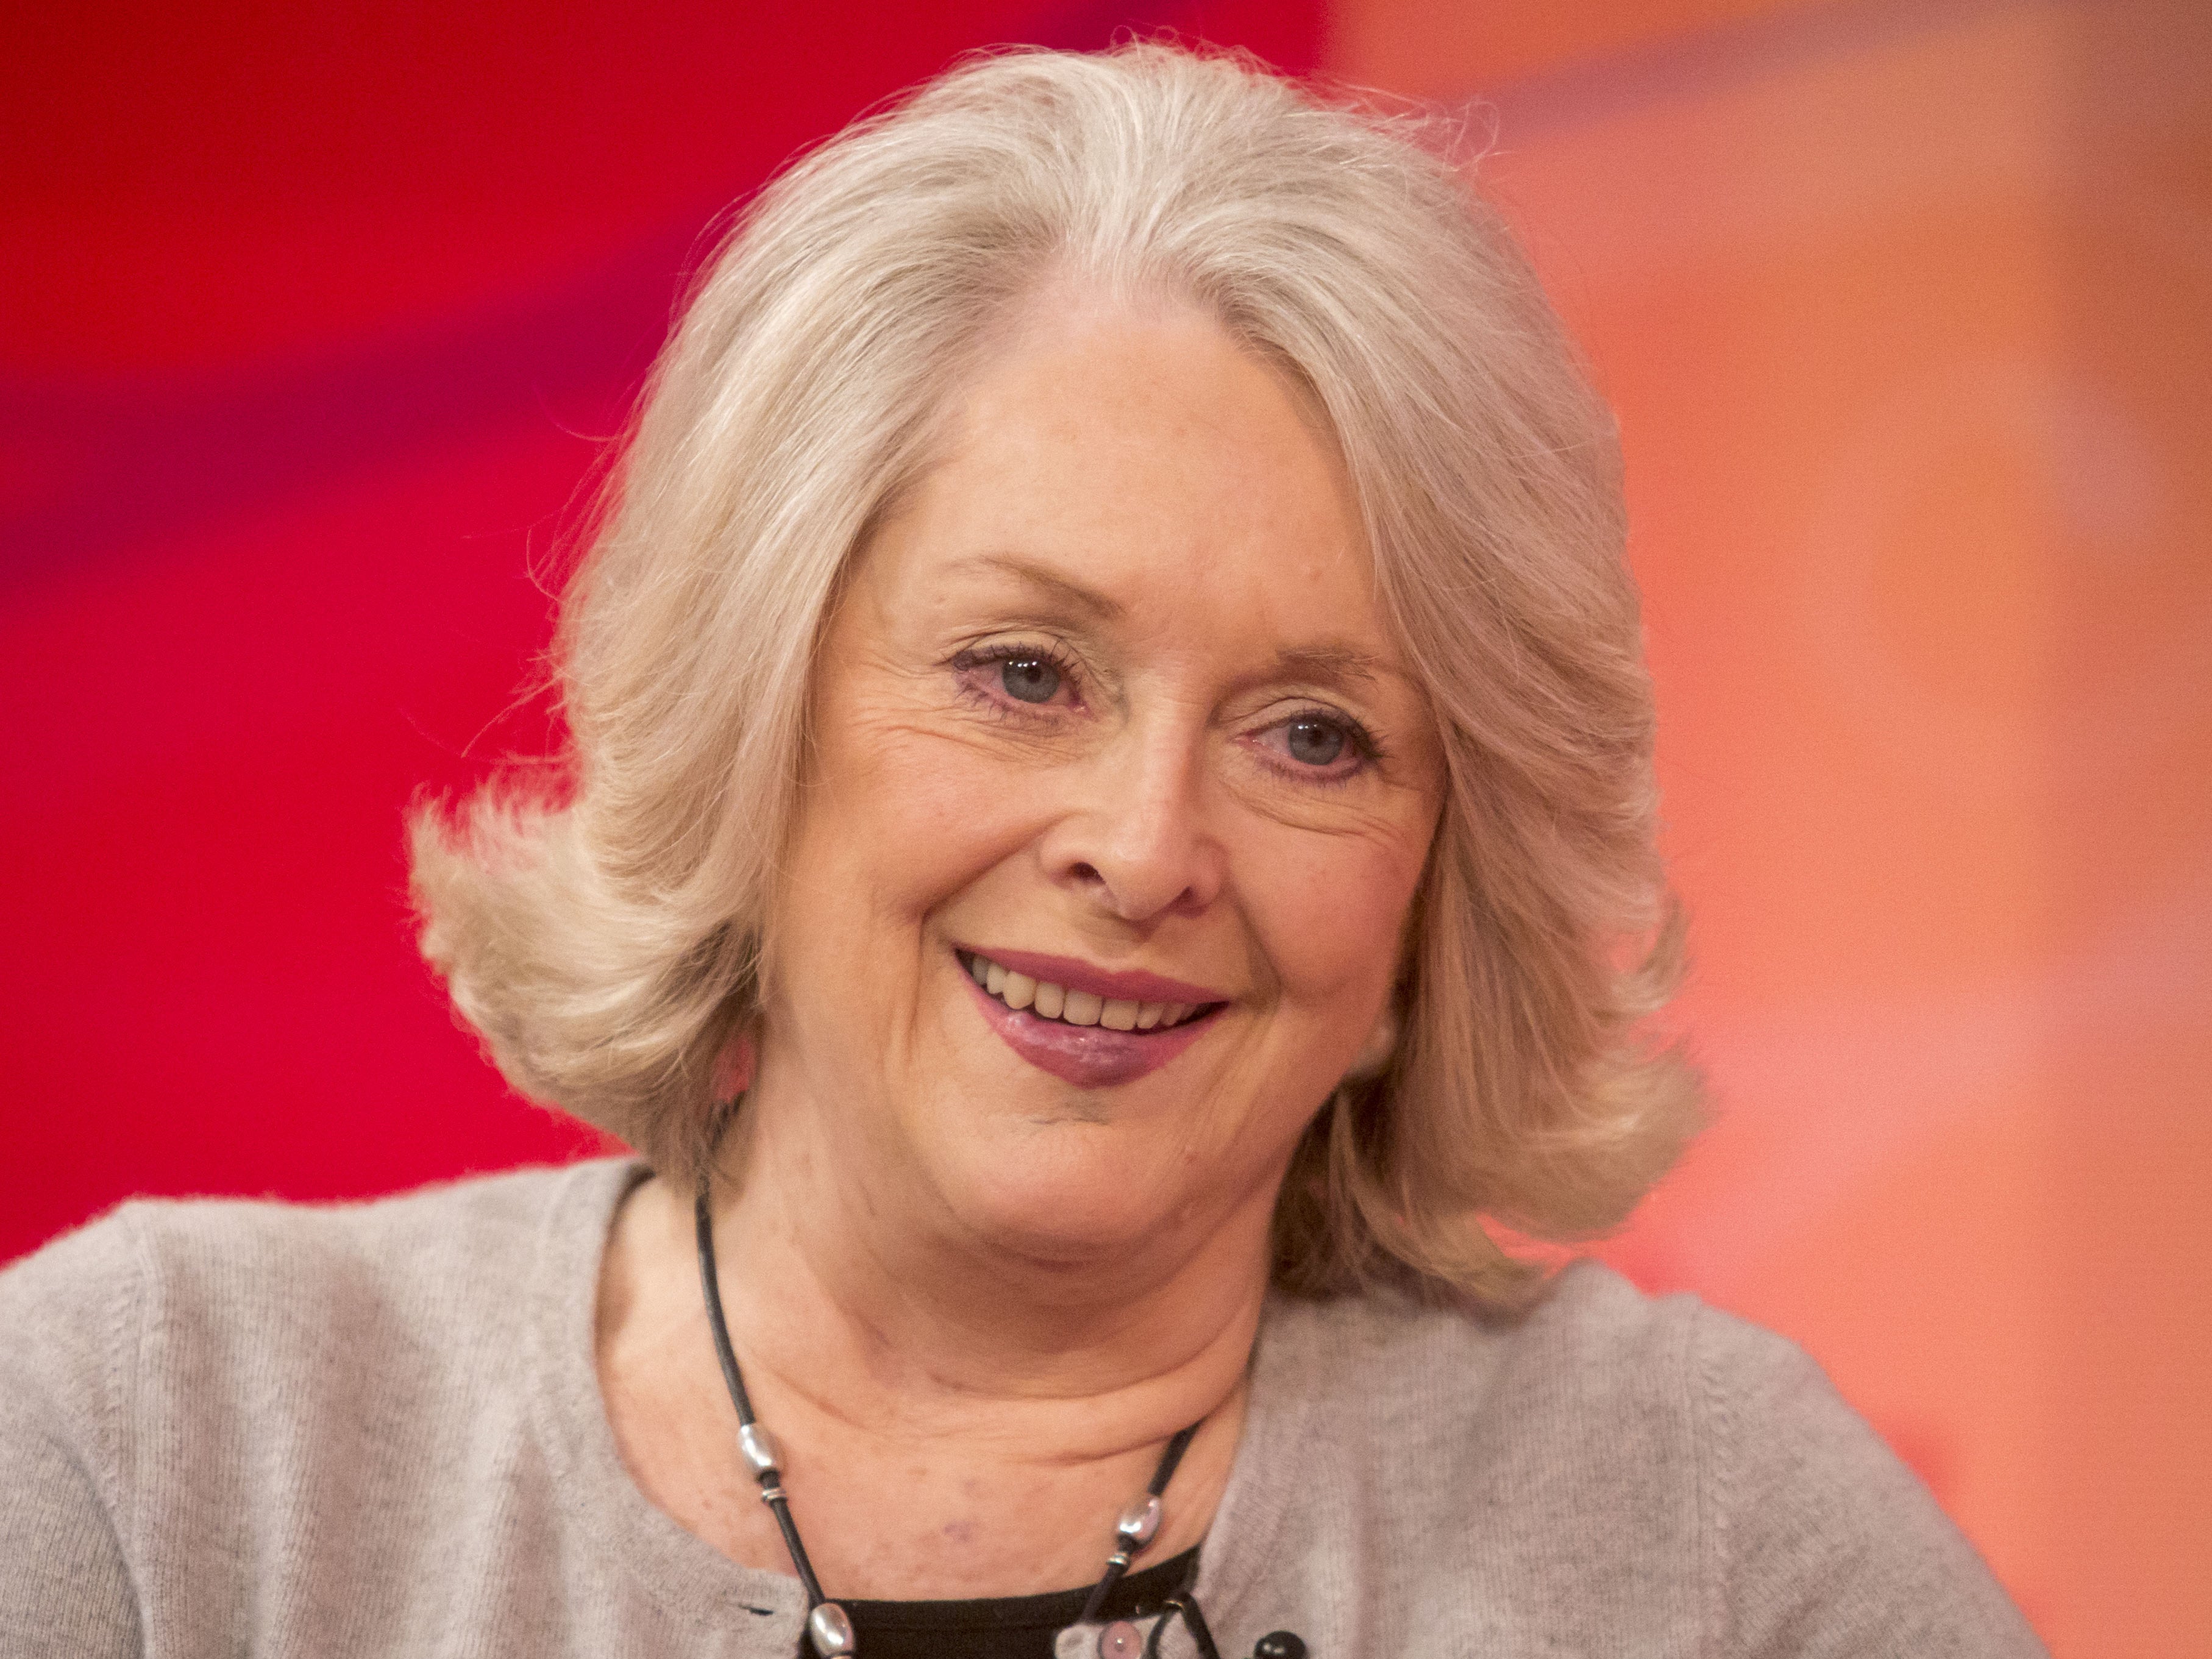 Judith Keppel is returning to ‘Eggheads’ for mileston episode